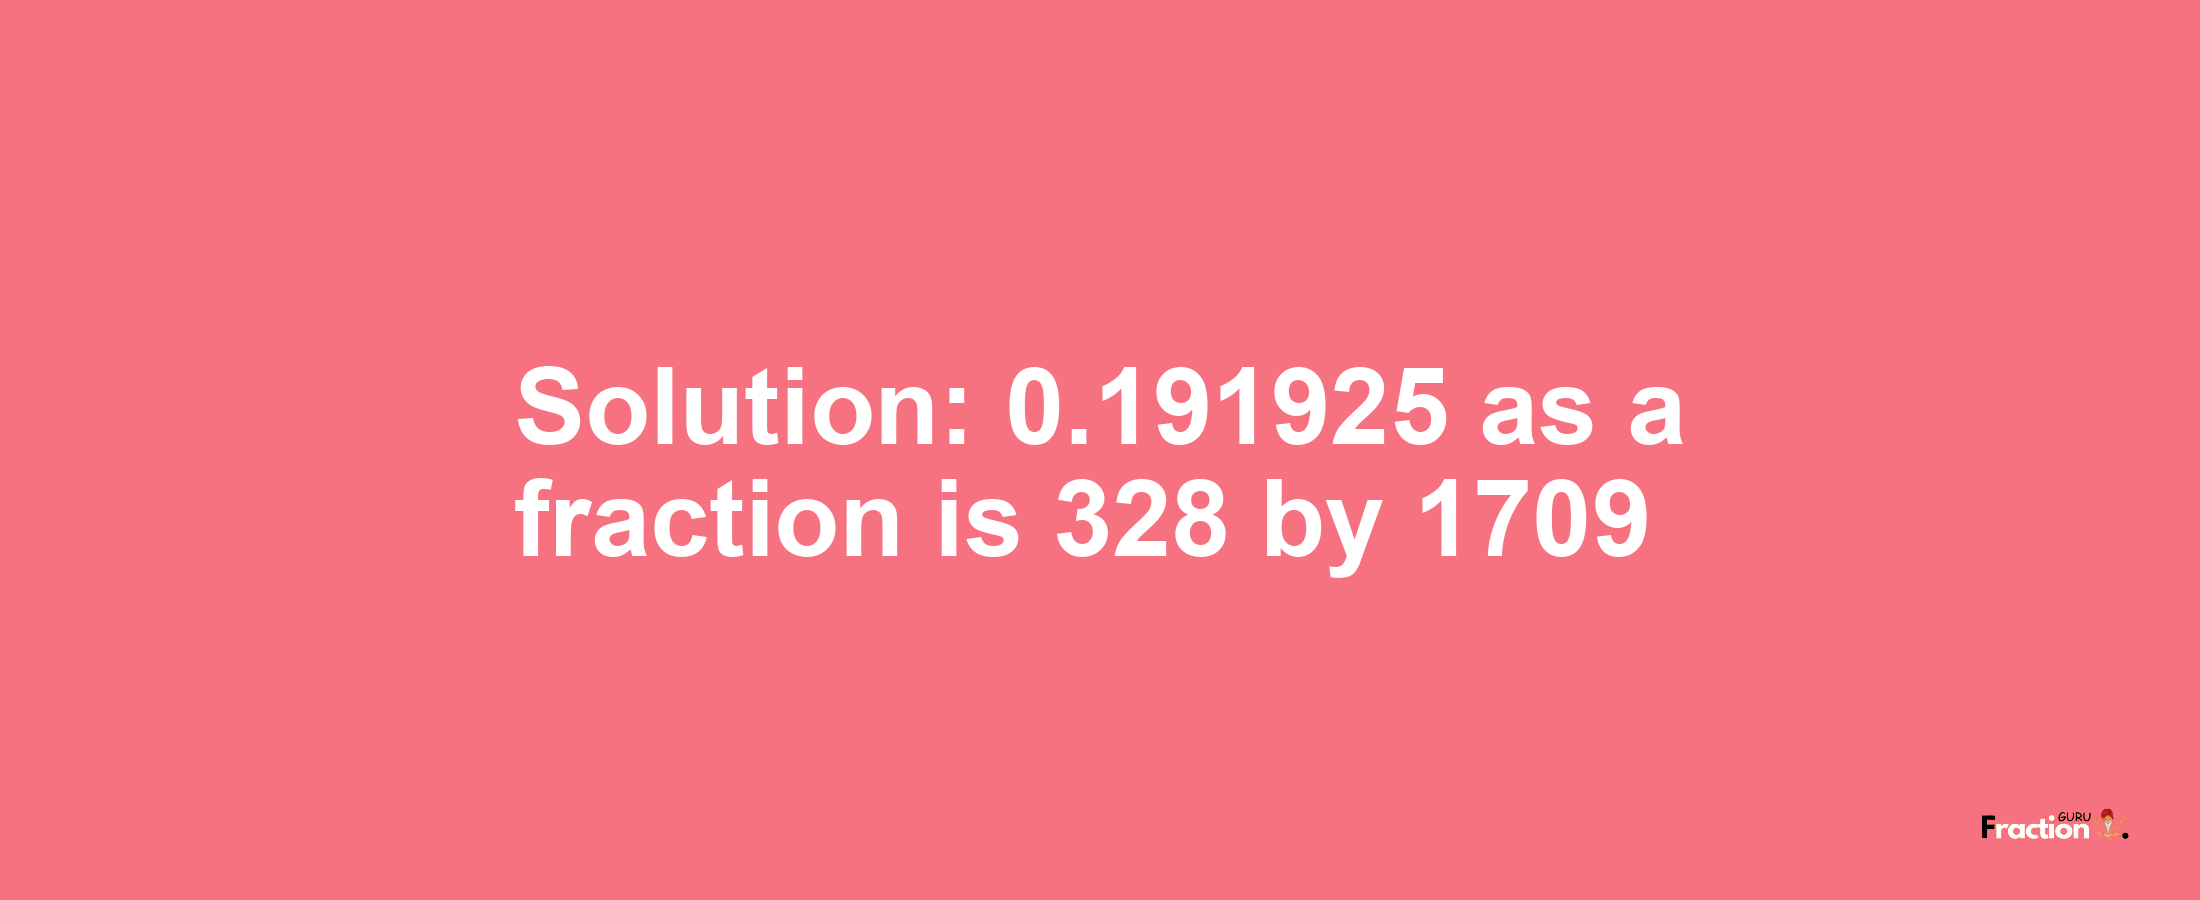 Solution:0.191925 as a fraction is 328/1709